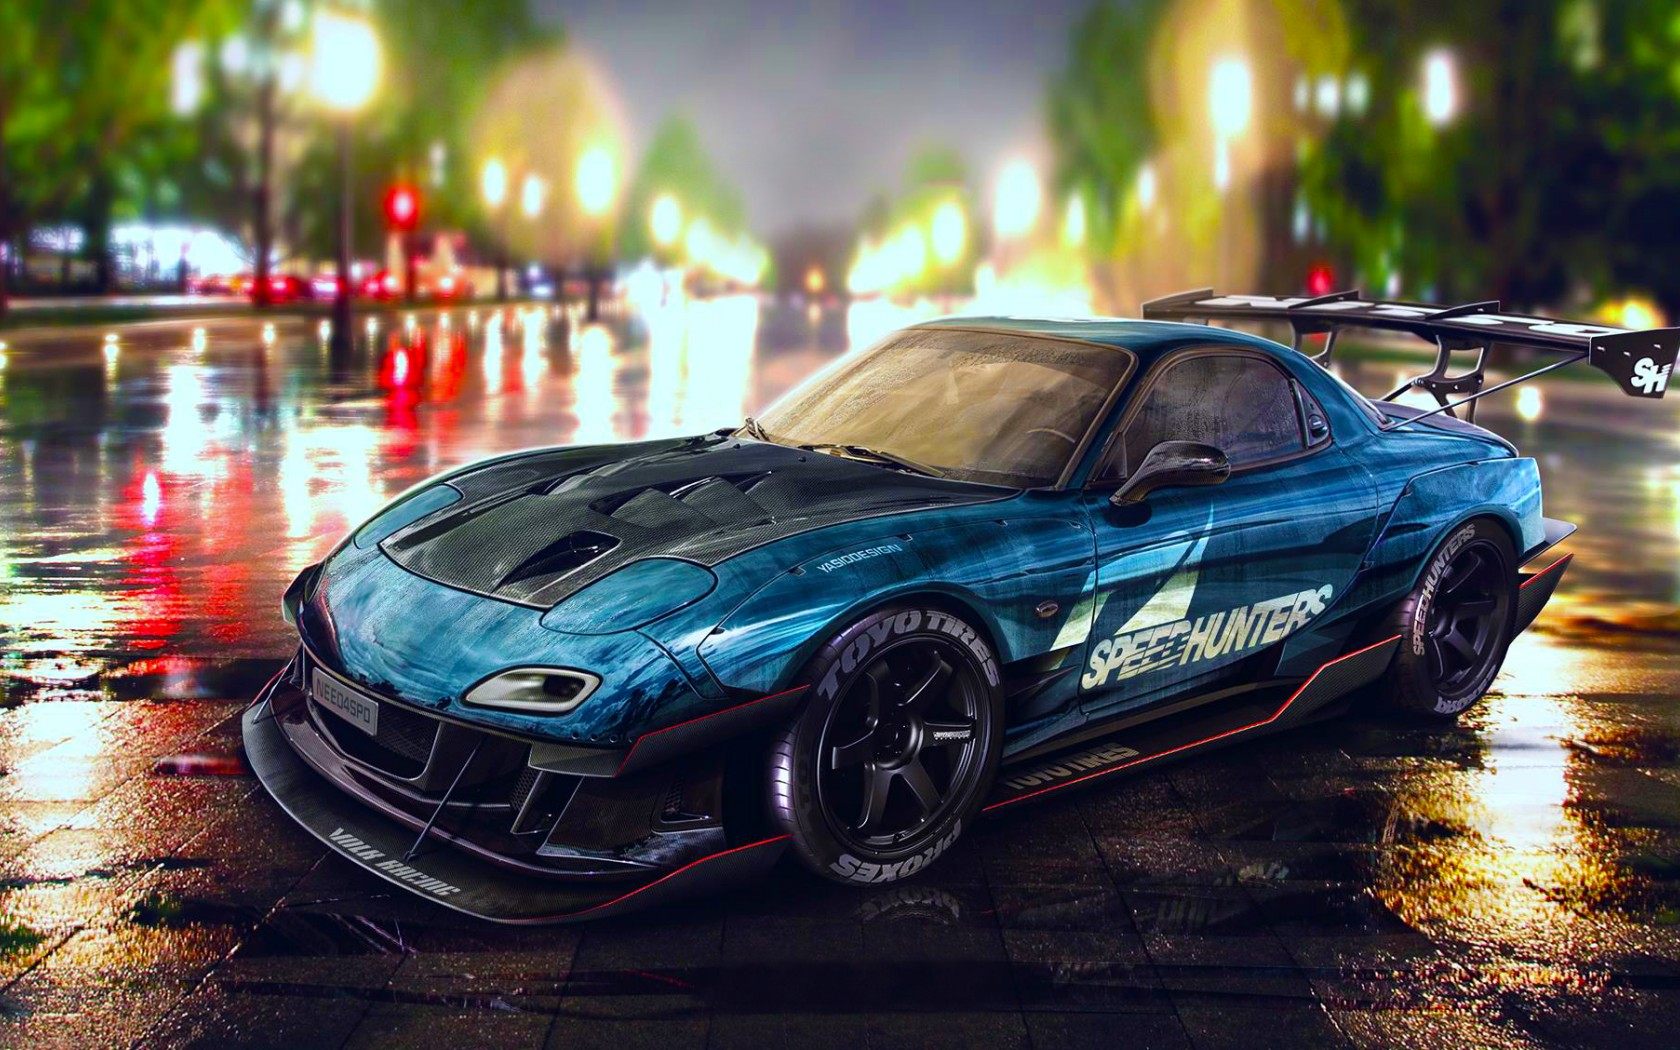 Awesome Mazda Rx7 Wallpaper Full HD Pictures